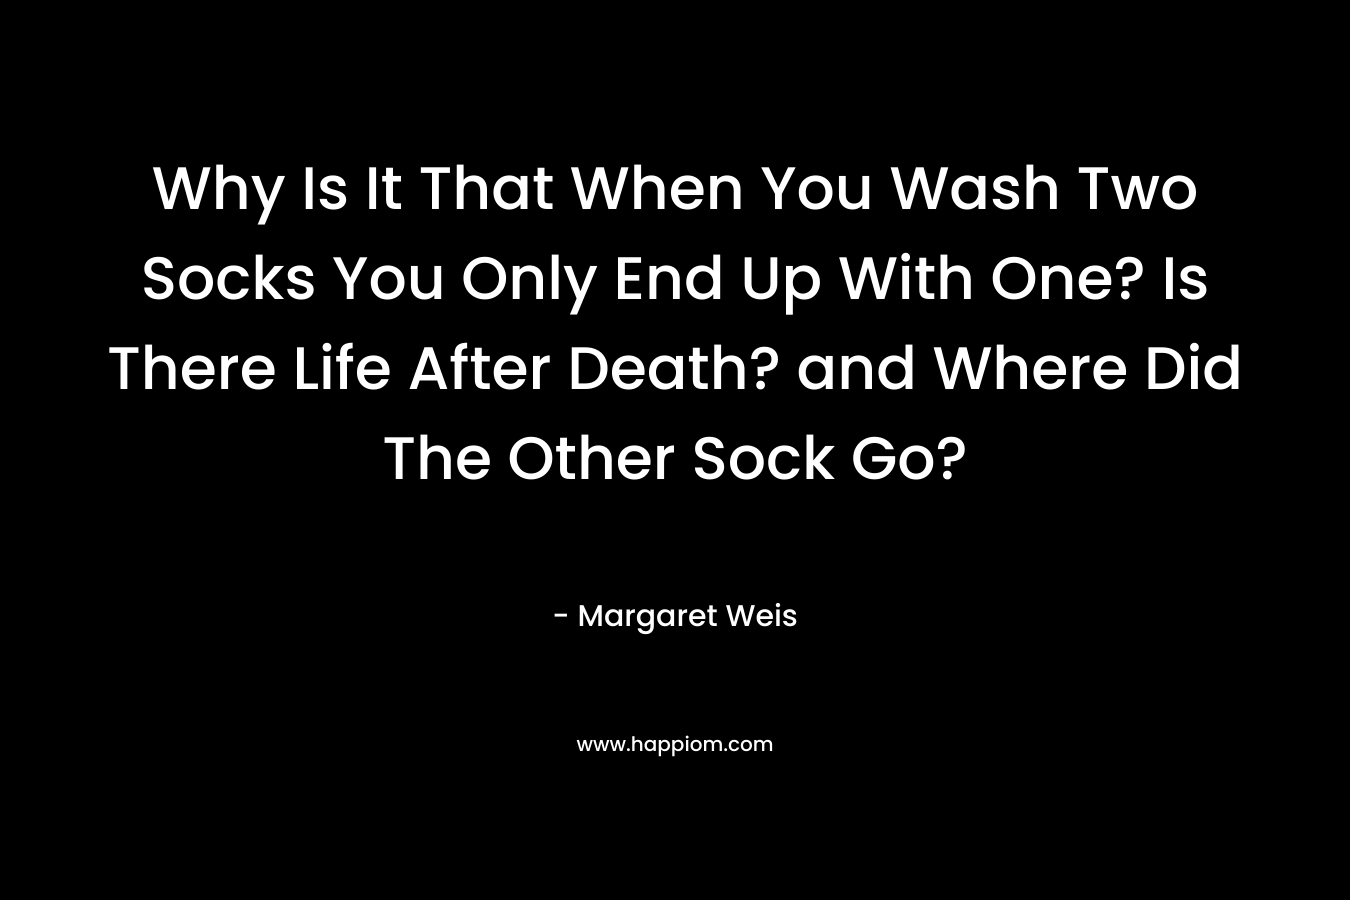 Why Is It That When You Wash Two Socks You Only End Up With One? Is There Life After Death? and Where Did The Other Sock Go? – Margaret Weis